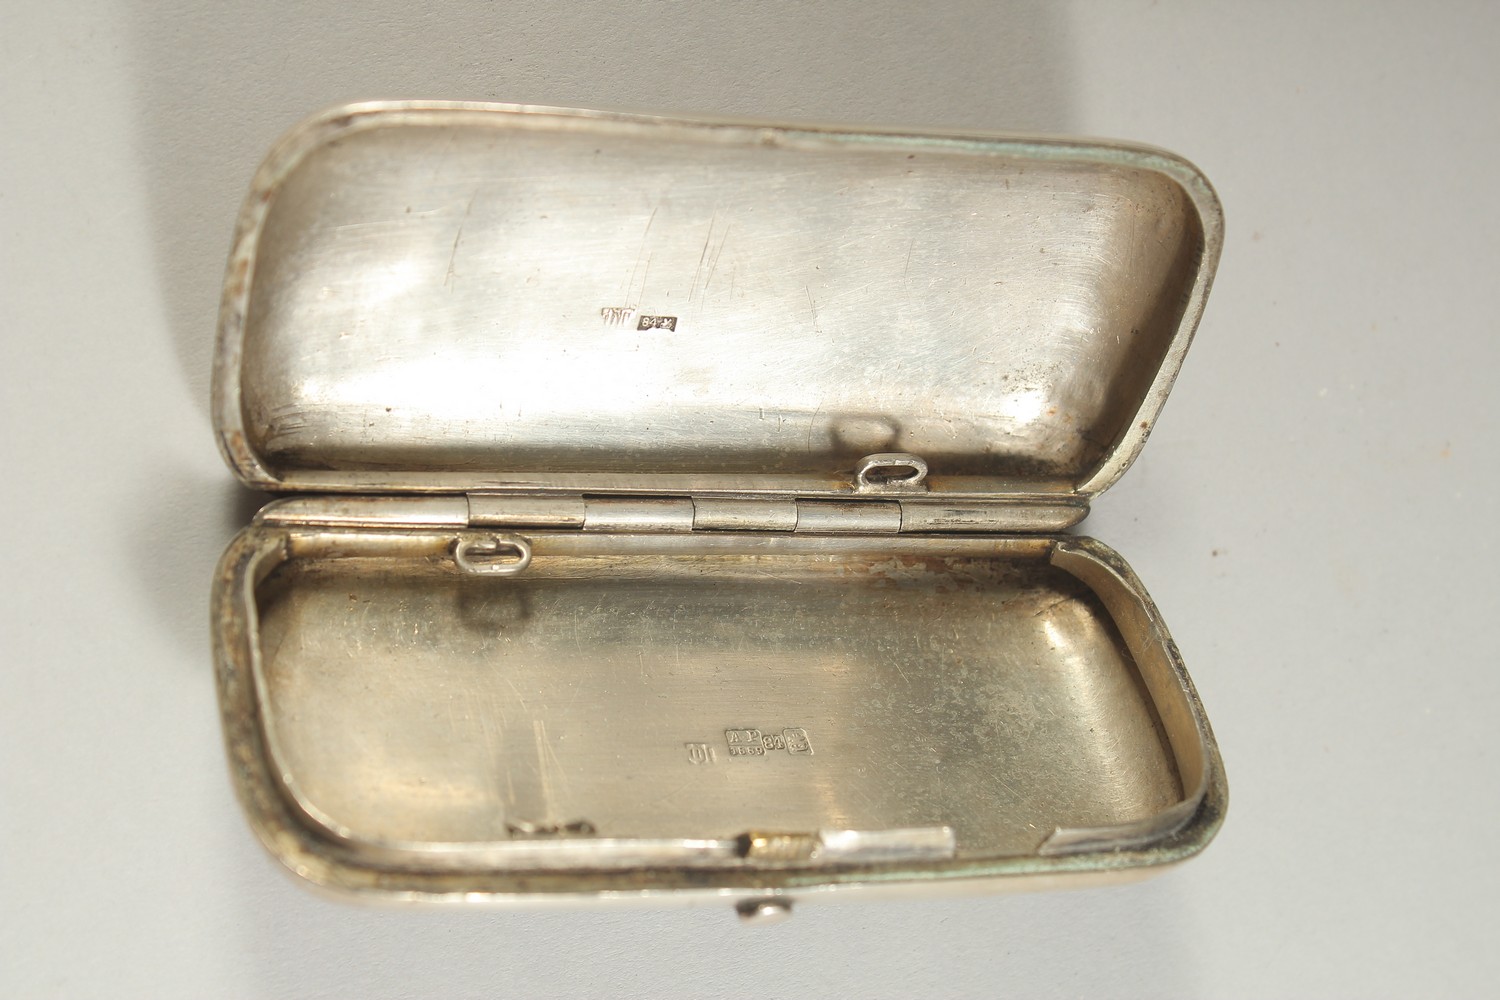 AN ANTIQUE RUSSIAN OTTOMAN SOLID SILVER AND NIELLO SNUFF BOX, 1889, with Arabic name inscribed, - Image 3 of 5